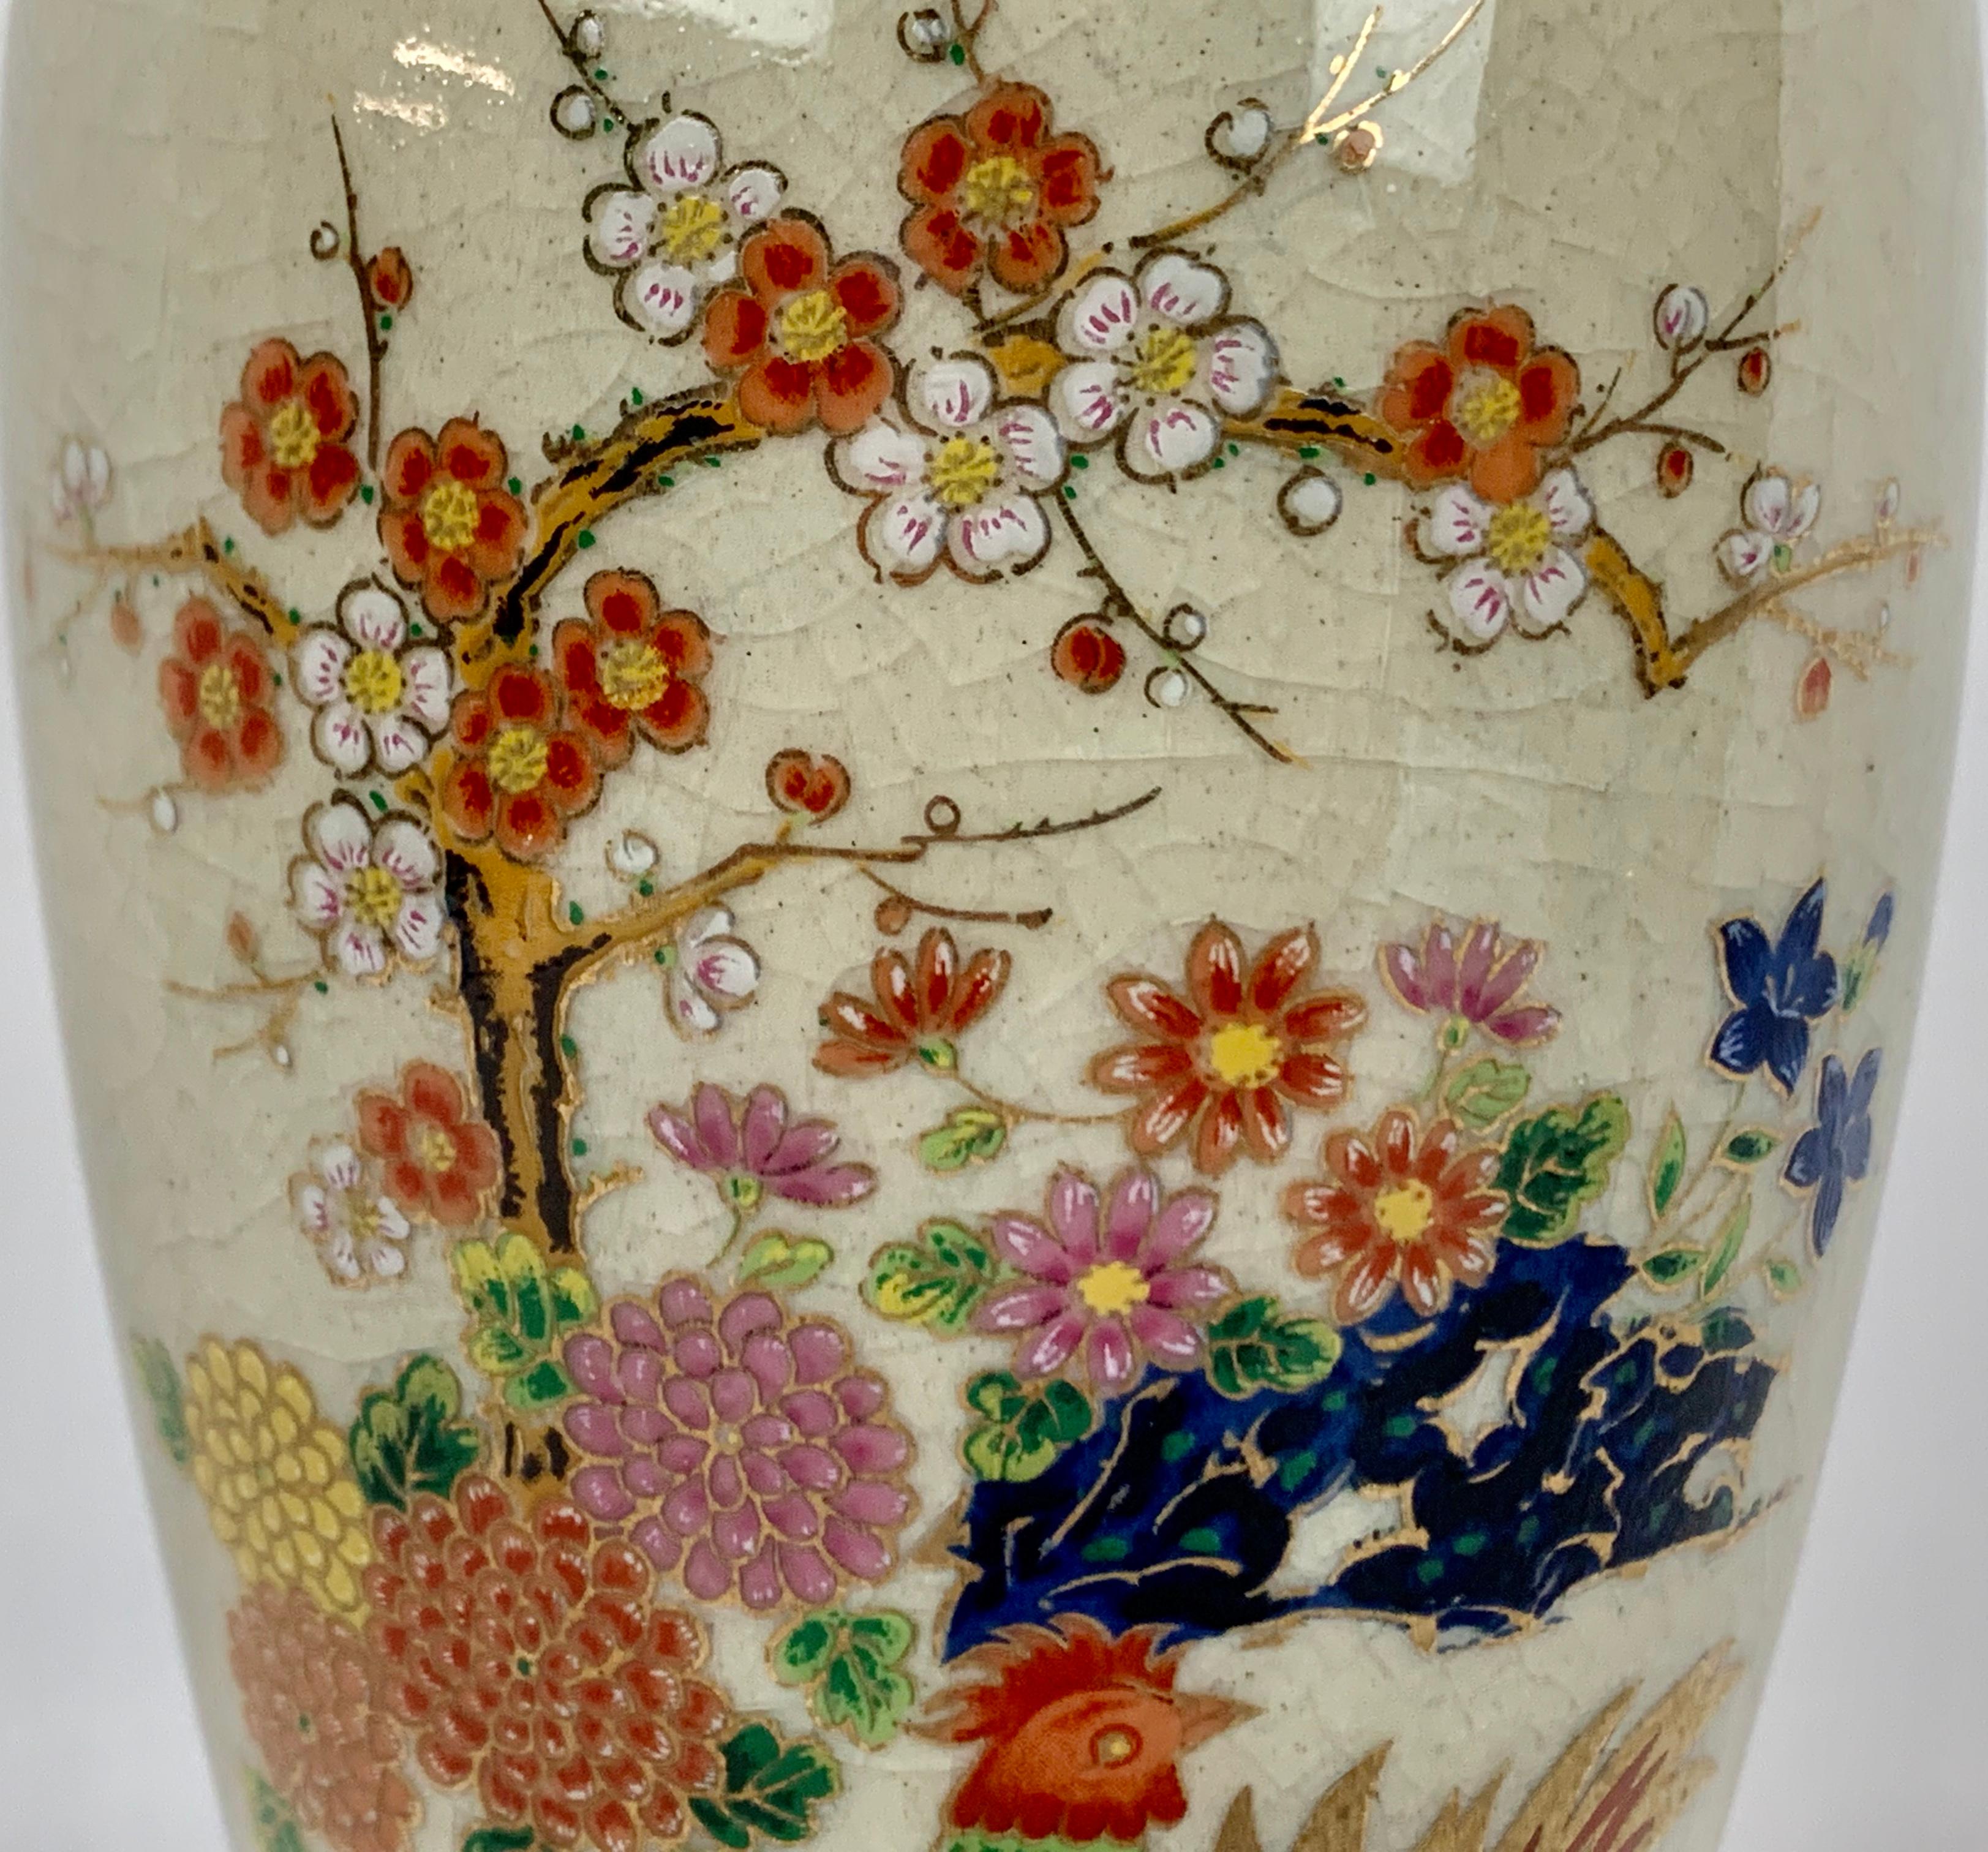 Japonisme Vase with Delicate Hand Painted Floral Spray on Neutral Ground-Japan, early 20th For Sale